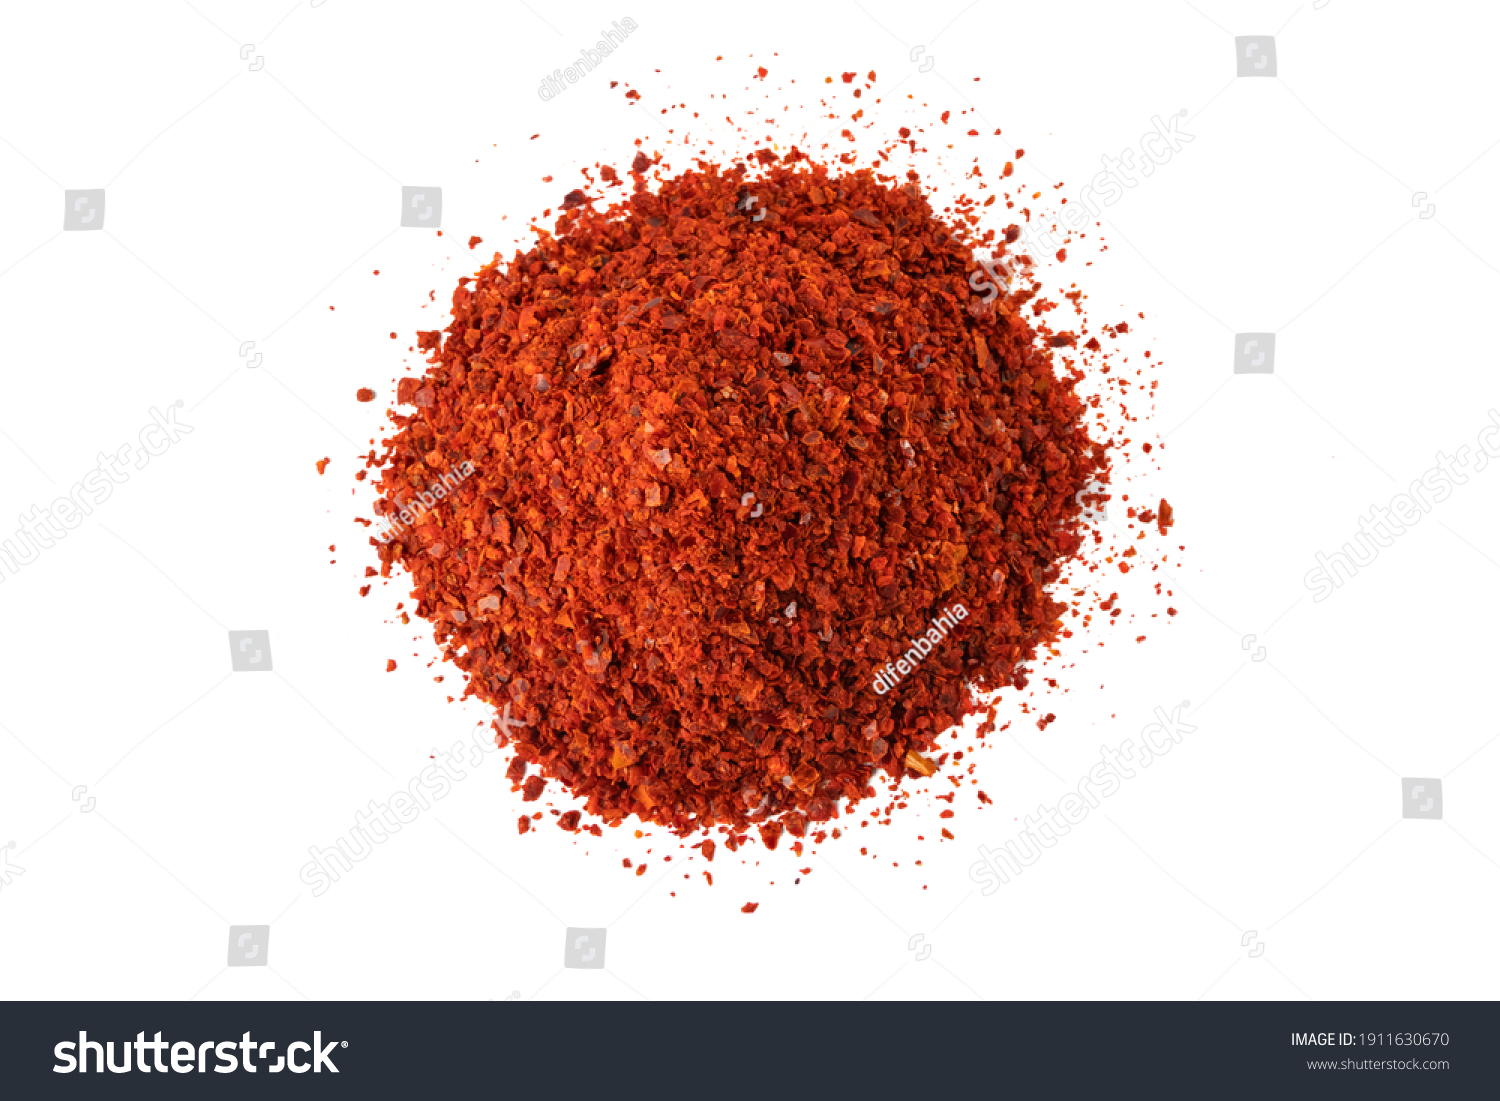 chilli pepper seedless flakes heap isolated on white background. Spices and food ingredients. in Korea known as Gochugaru. Used for Kimchi. #1911630670